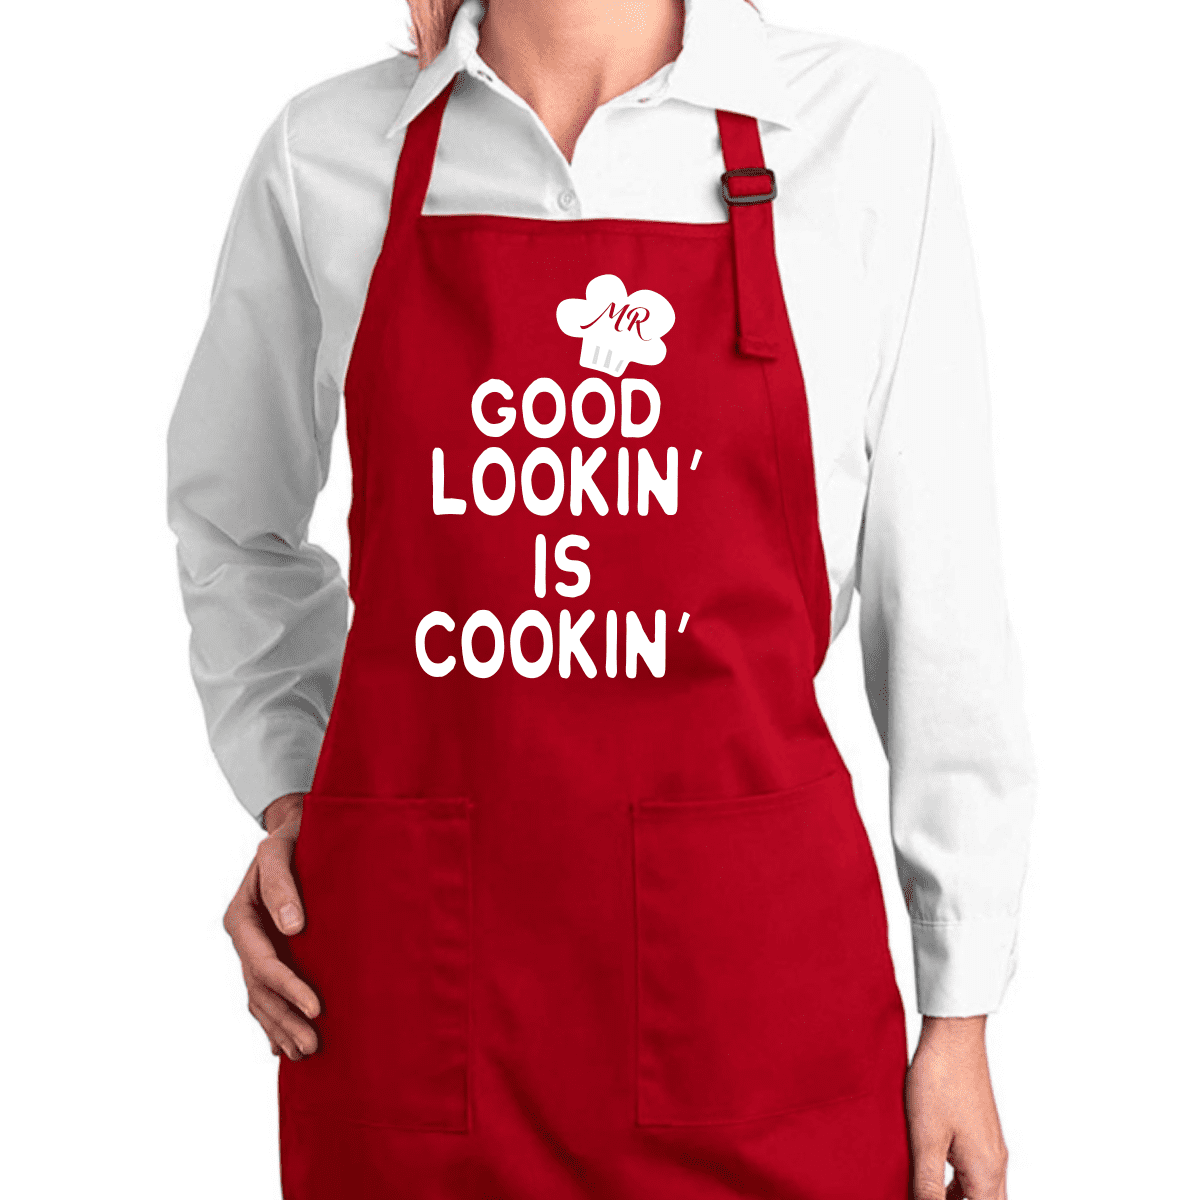 Keep Calm And Carry On Baking Apron Novelty Bib Apron Funny Kitchen Chef Cook 